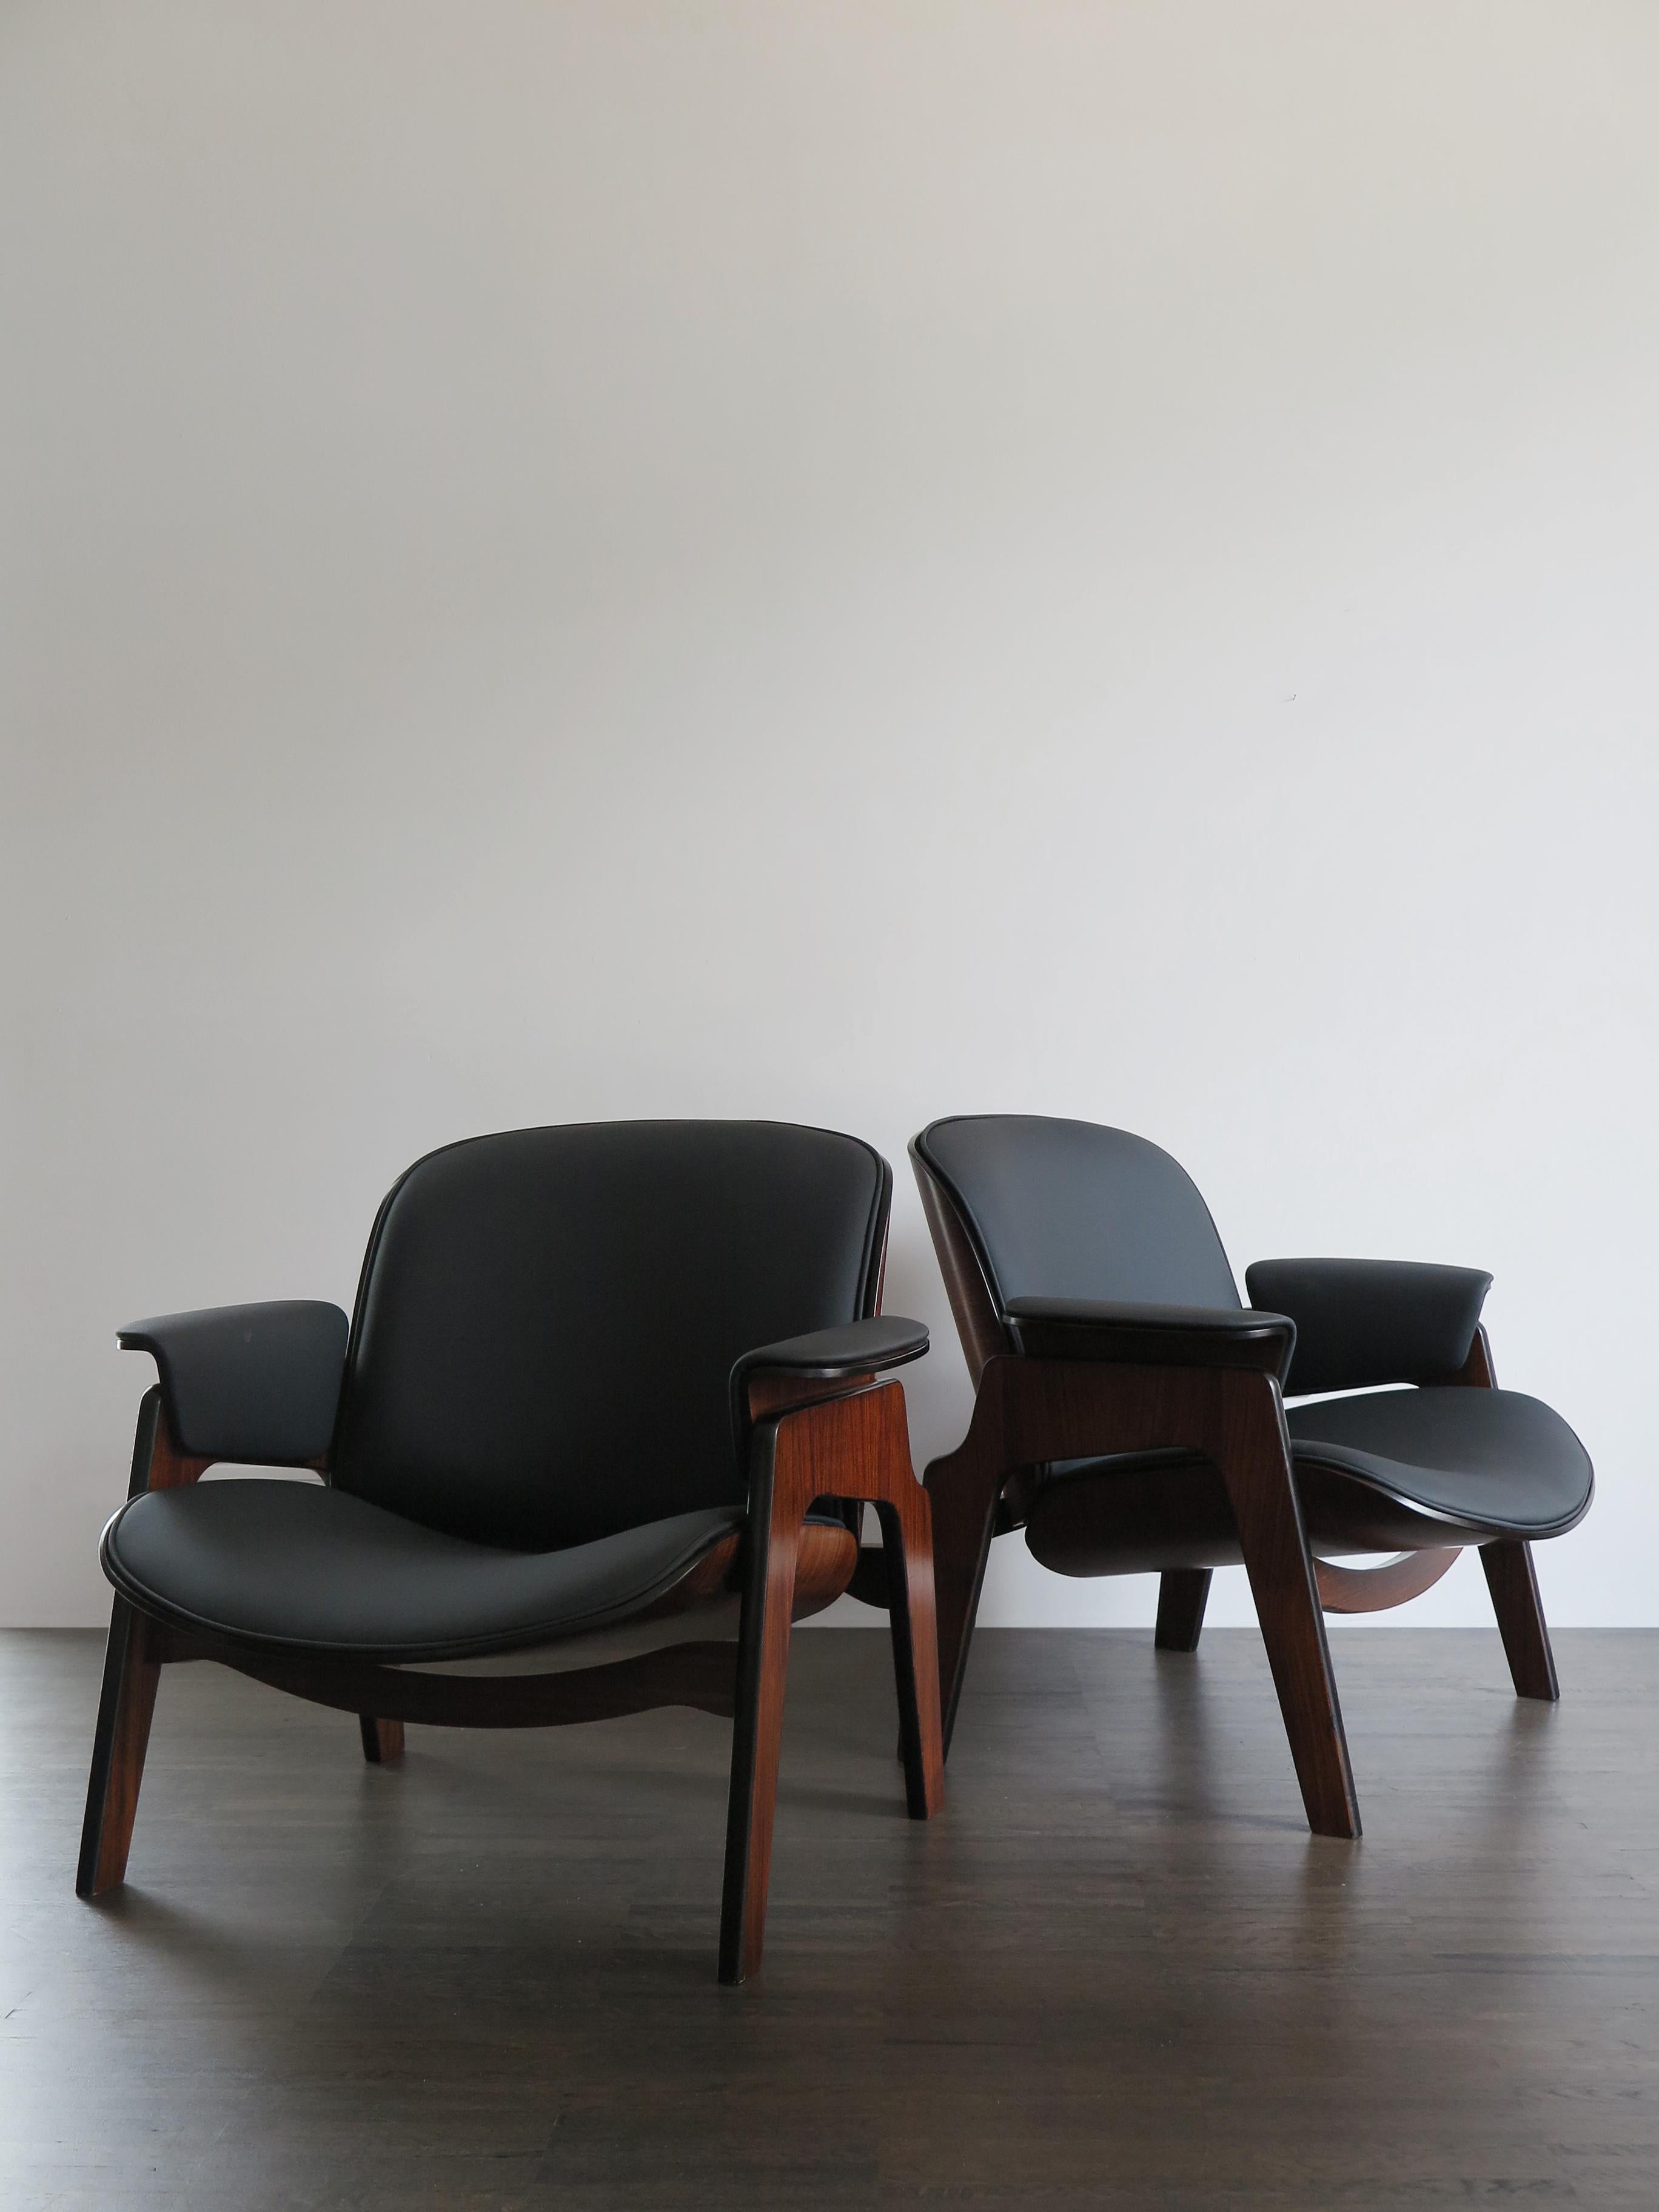 Tan France Auction Picks

Italian Mid-Century Modern design set of two armchairs designed in the style of Ico Parisi for Mim Roma
with dark wooden frame and curved plywood, leatherette upholstery, 1960s.
Please note that the armchairs are original